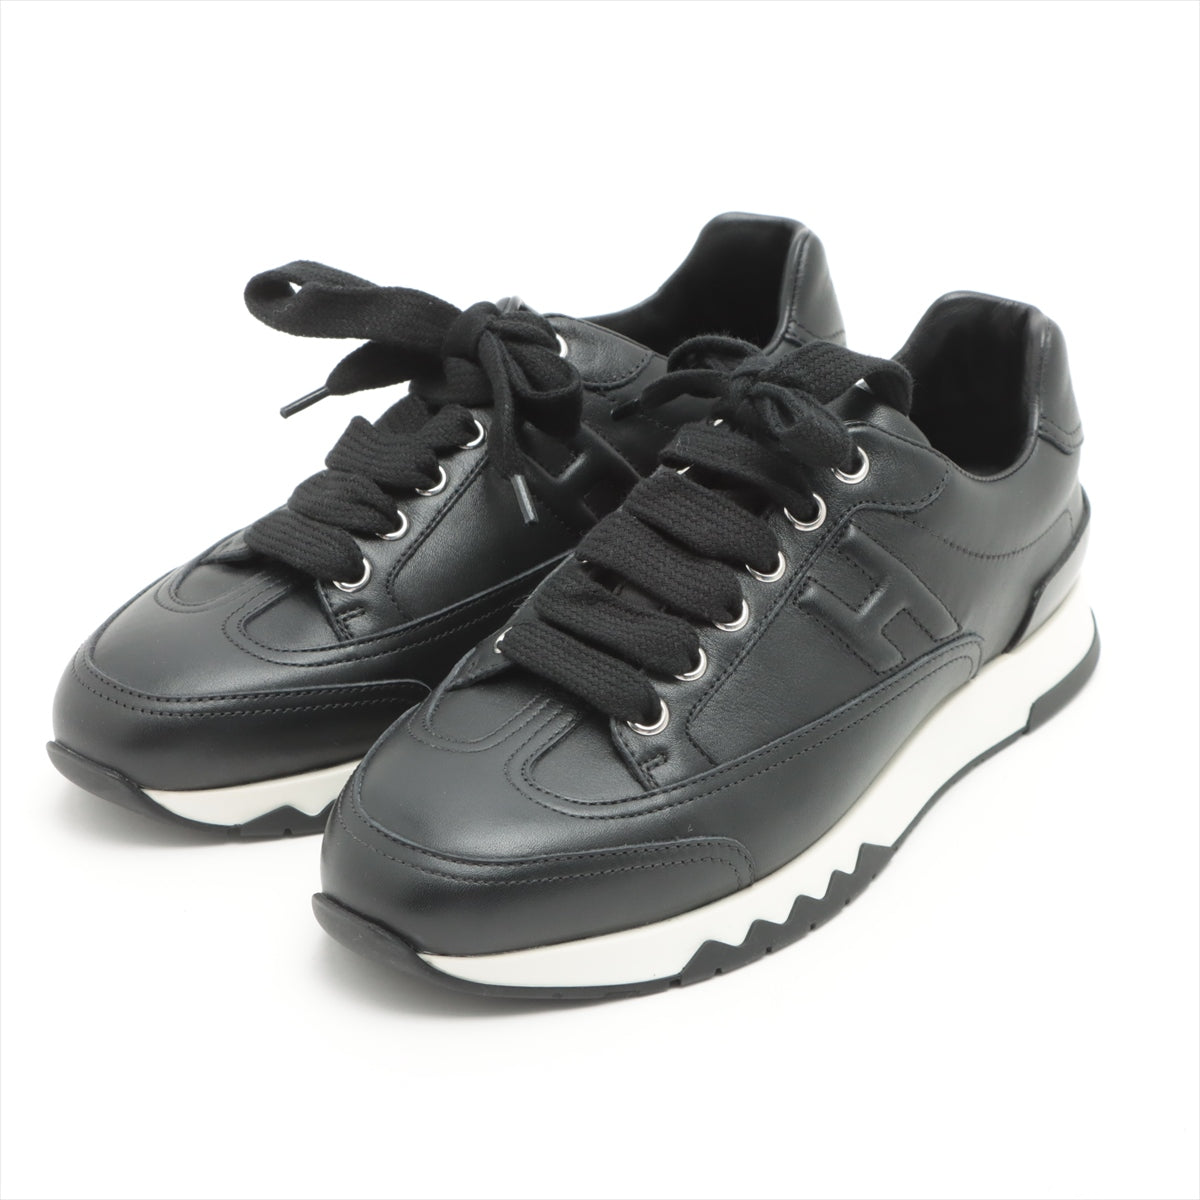 Hermès trails Leather Sneakers 35 1/2 Ladies' Black × White Is there a replacement string